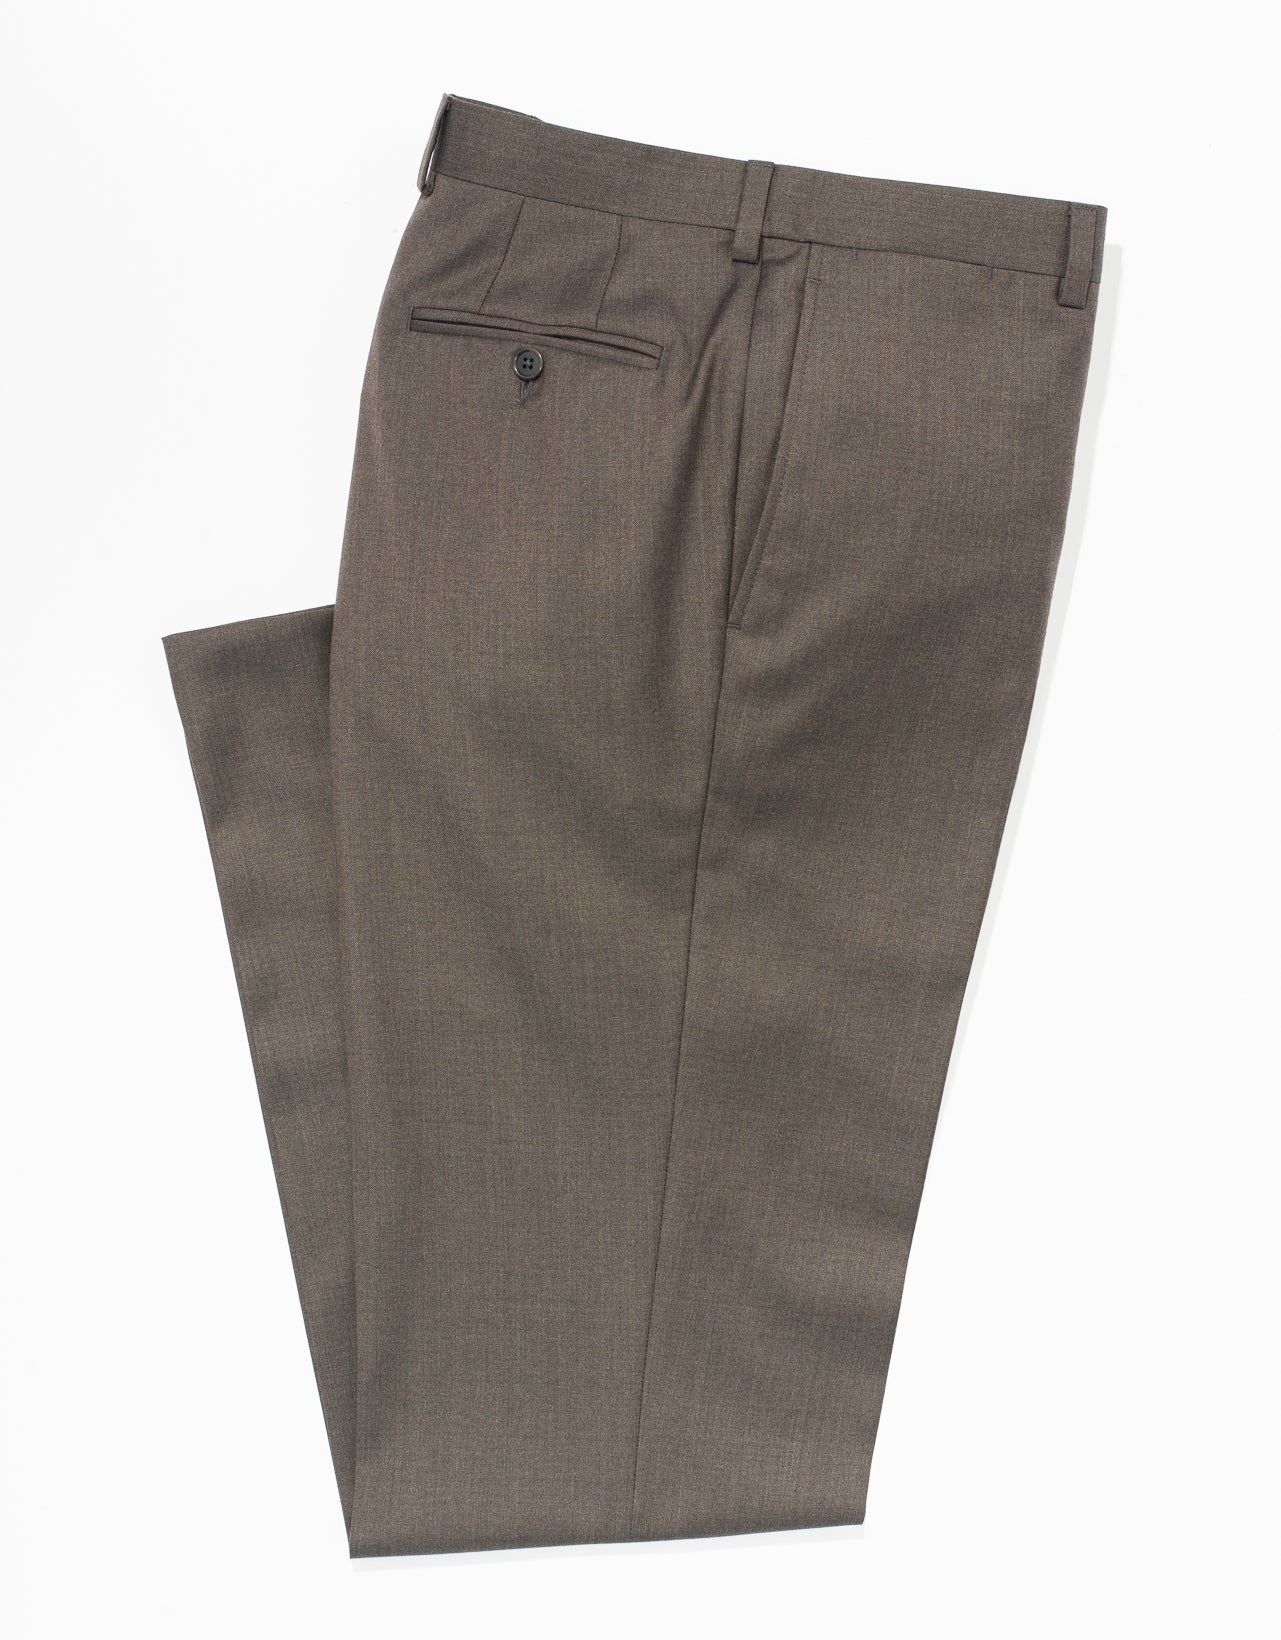 LIGHT BROWN WOOL TWILL TROUSERS - CLASSIC FIT